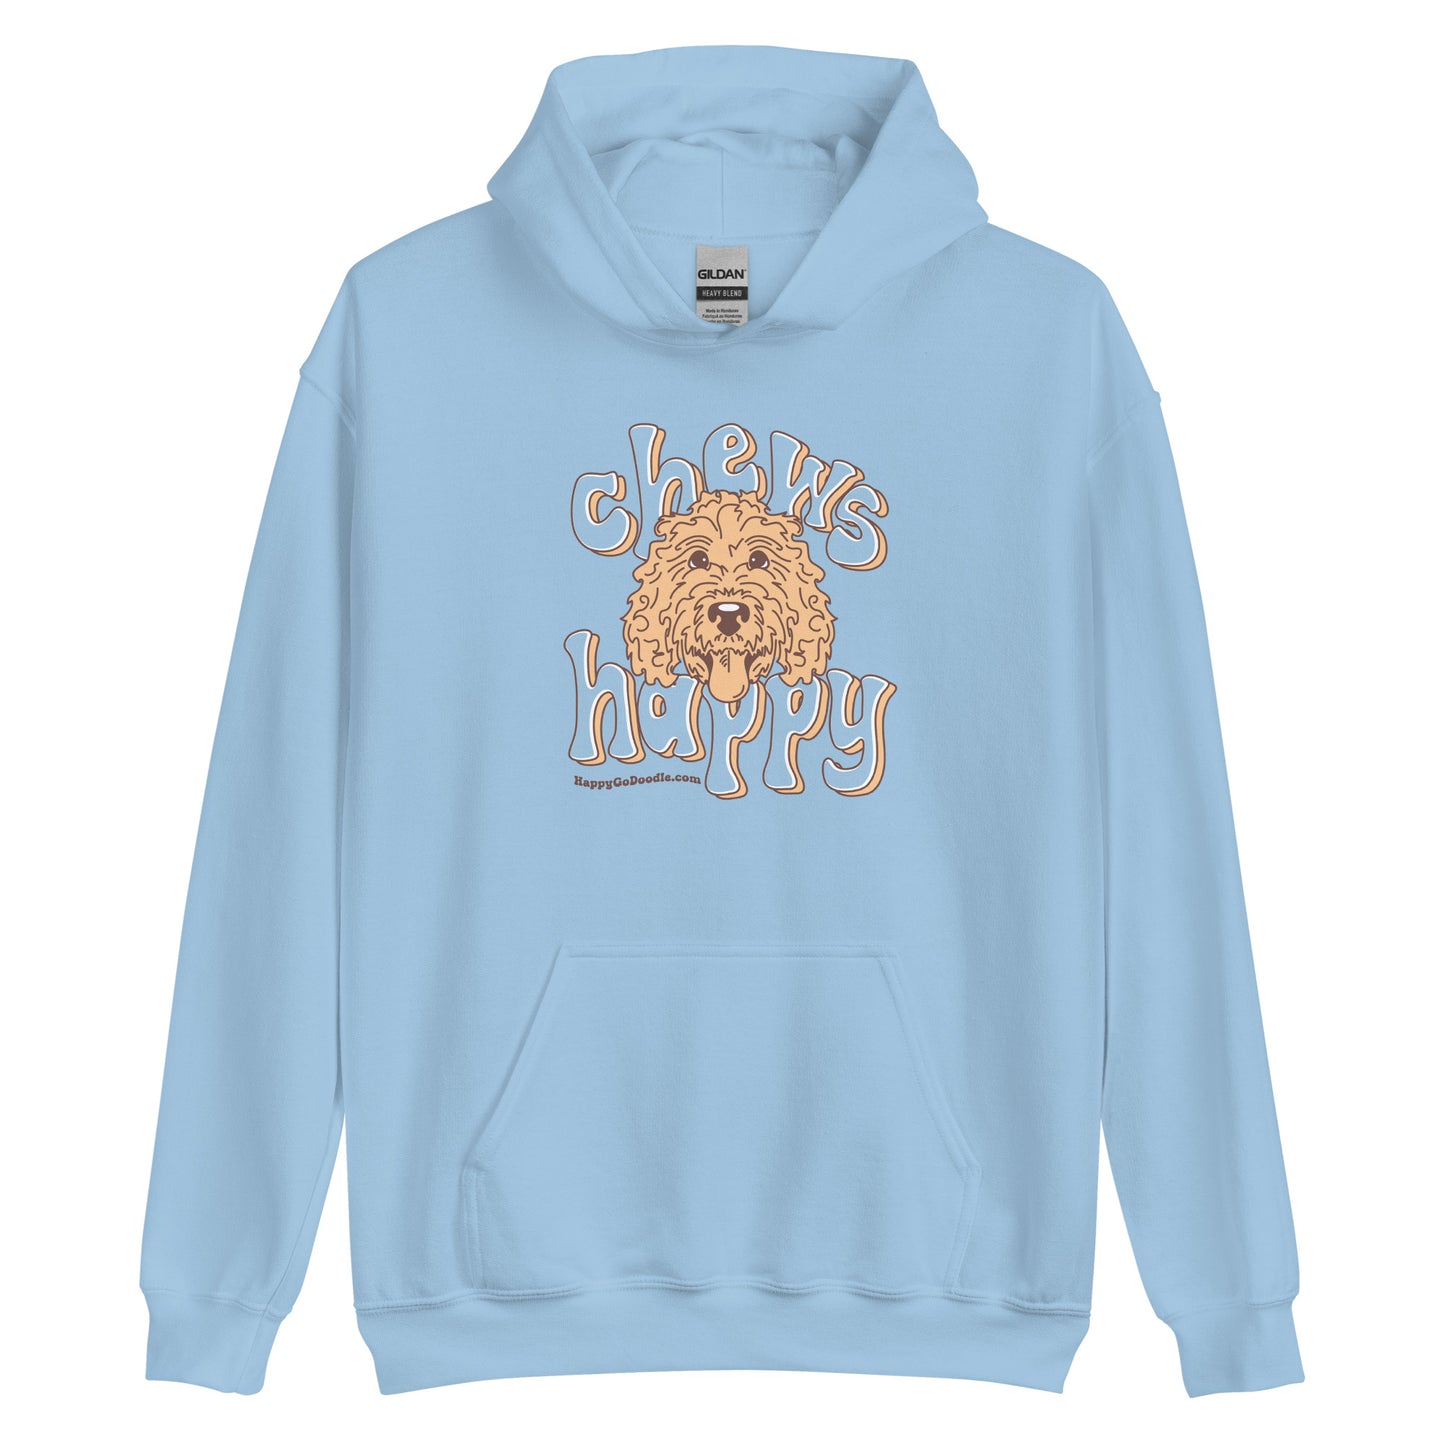 Goldendoodle hoodie with Goldendoodle face and words "Chews Happy" in light blue color